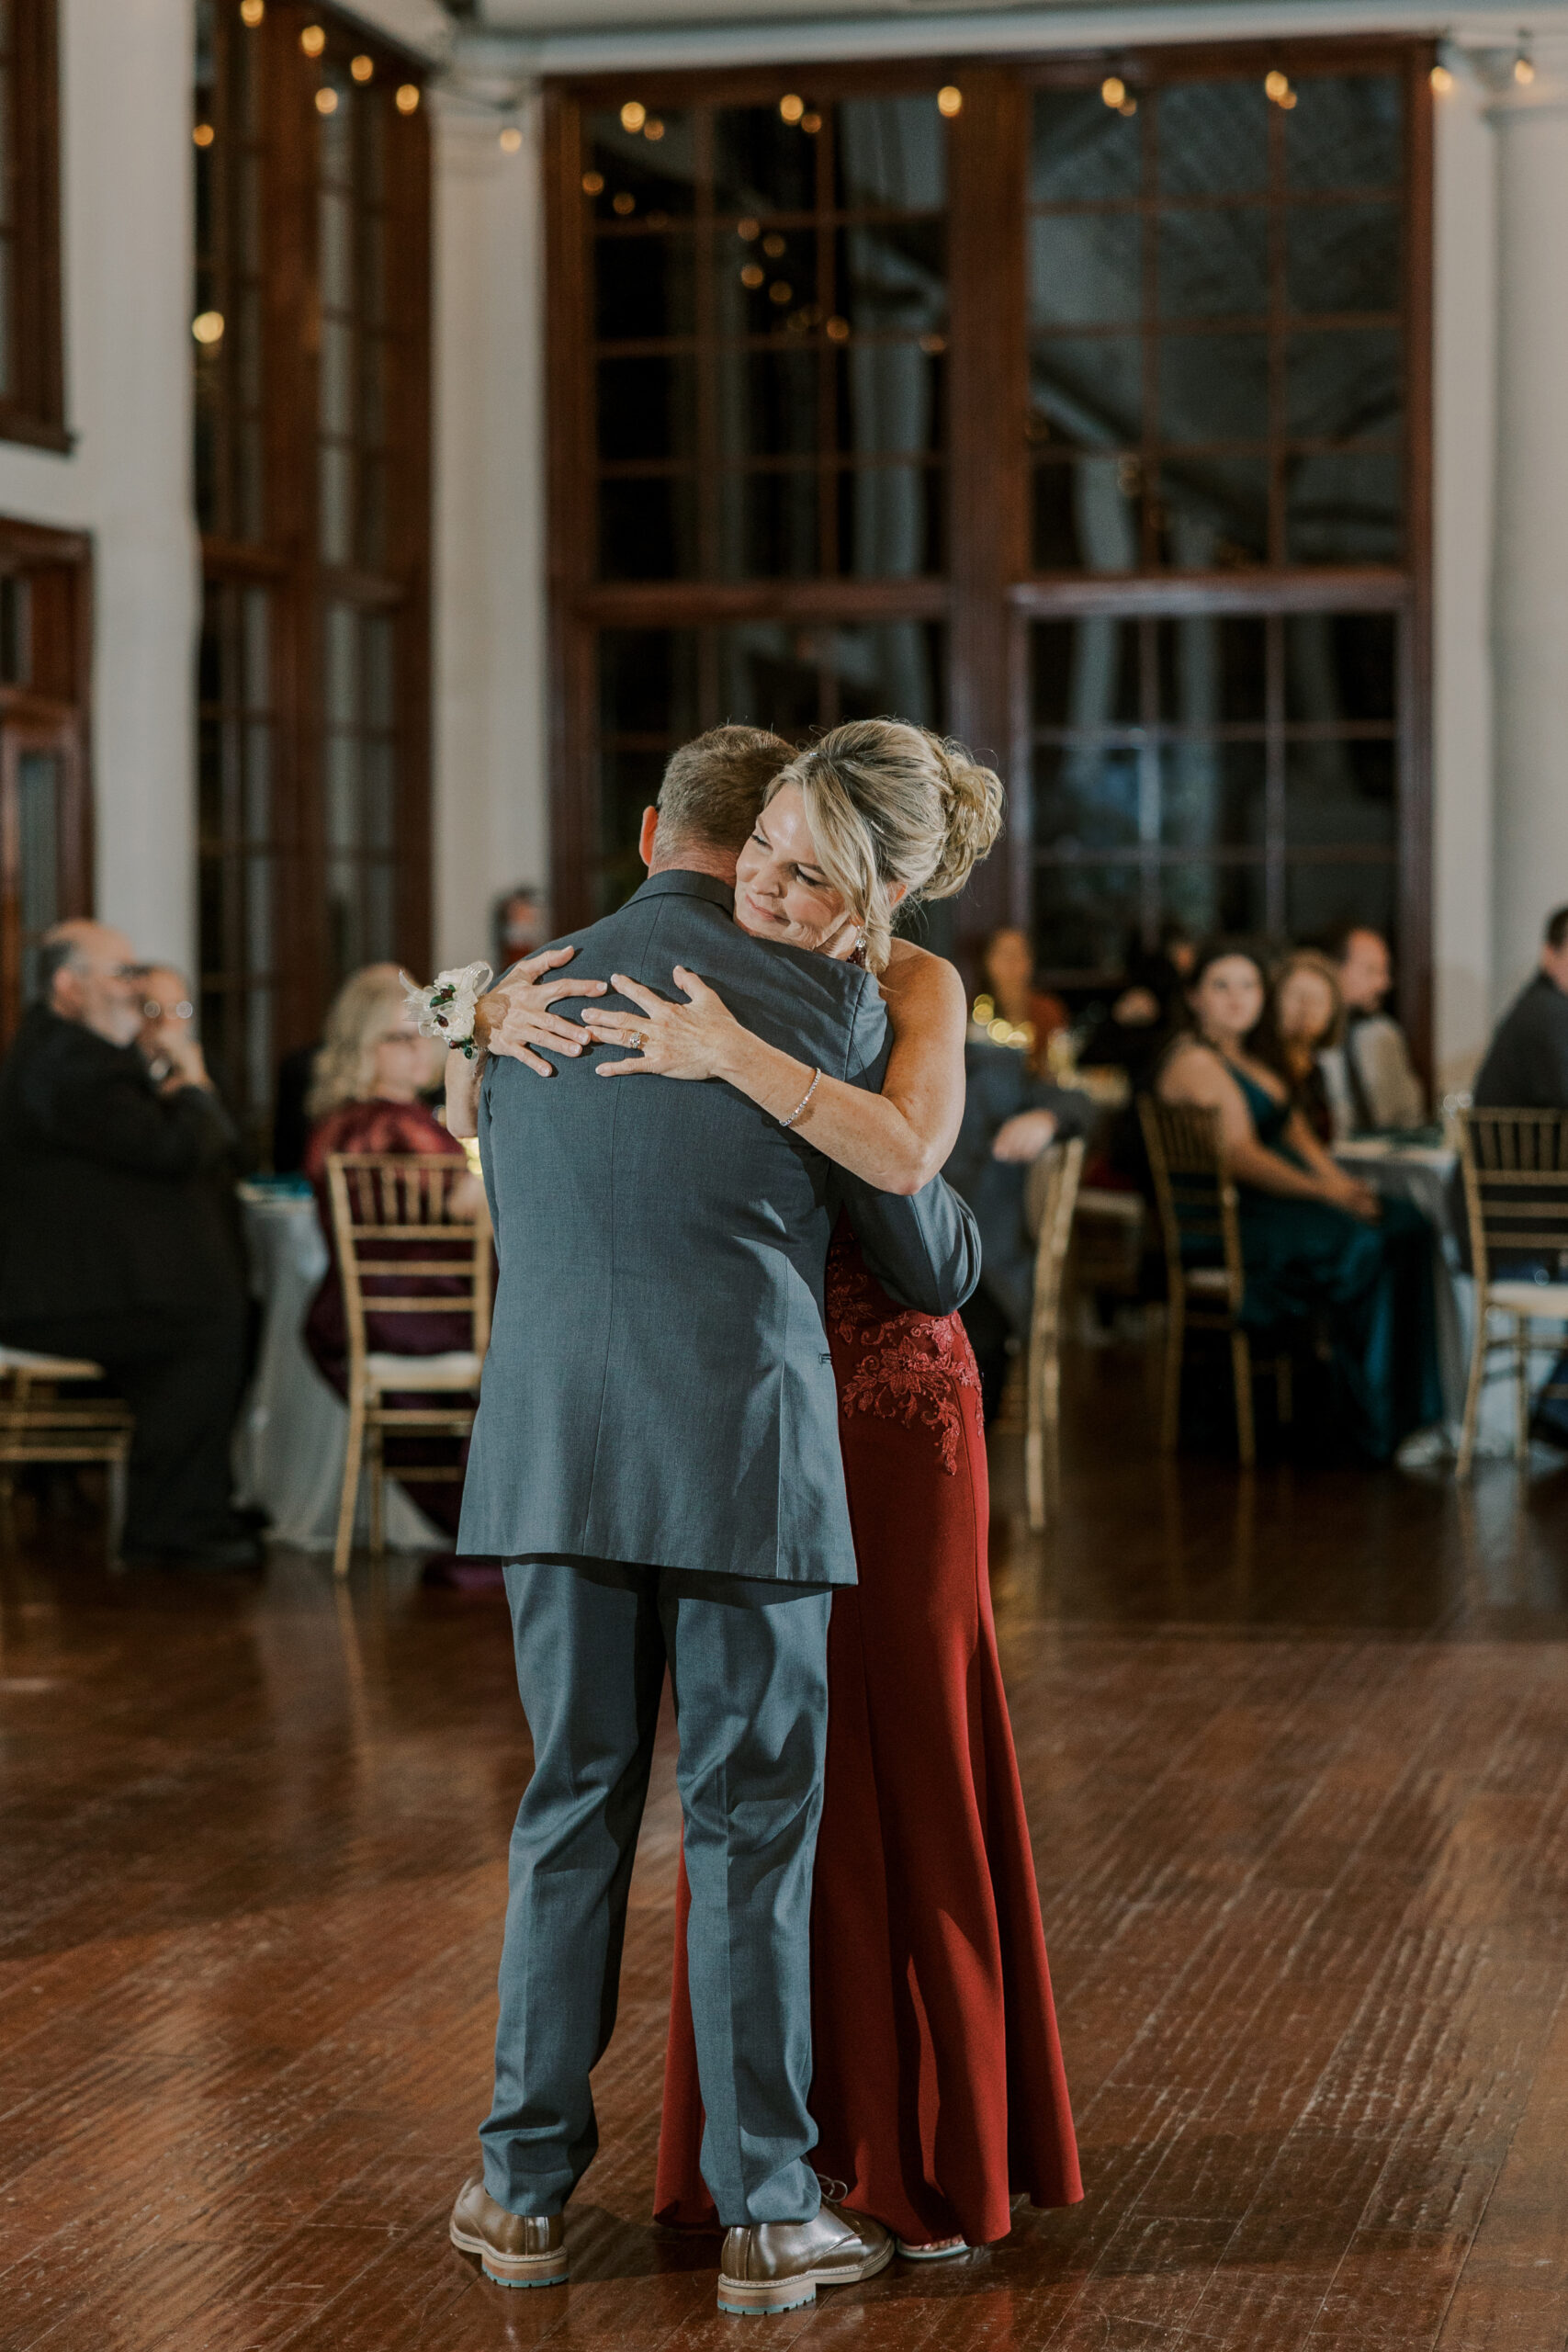 the groom and his mom share a special dance